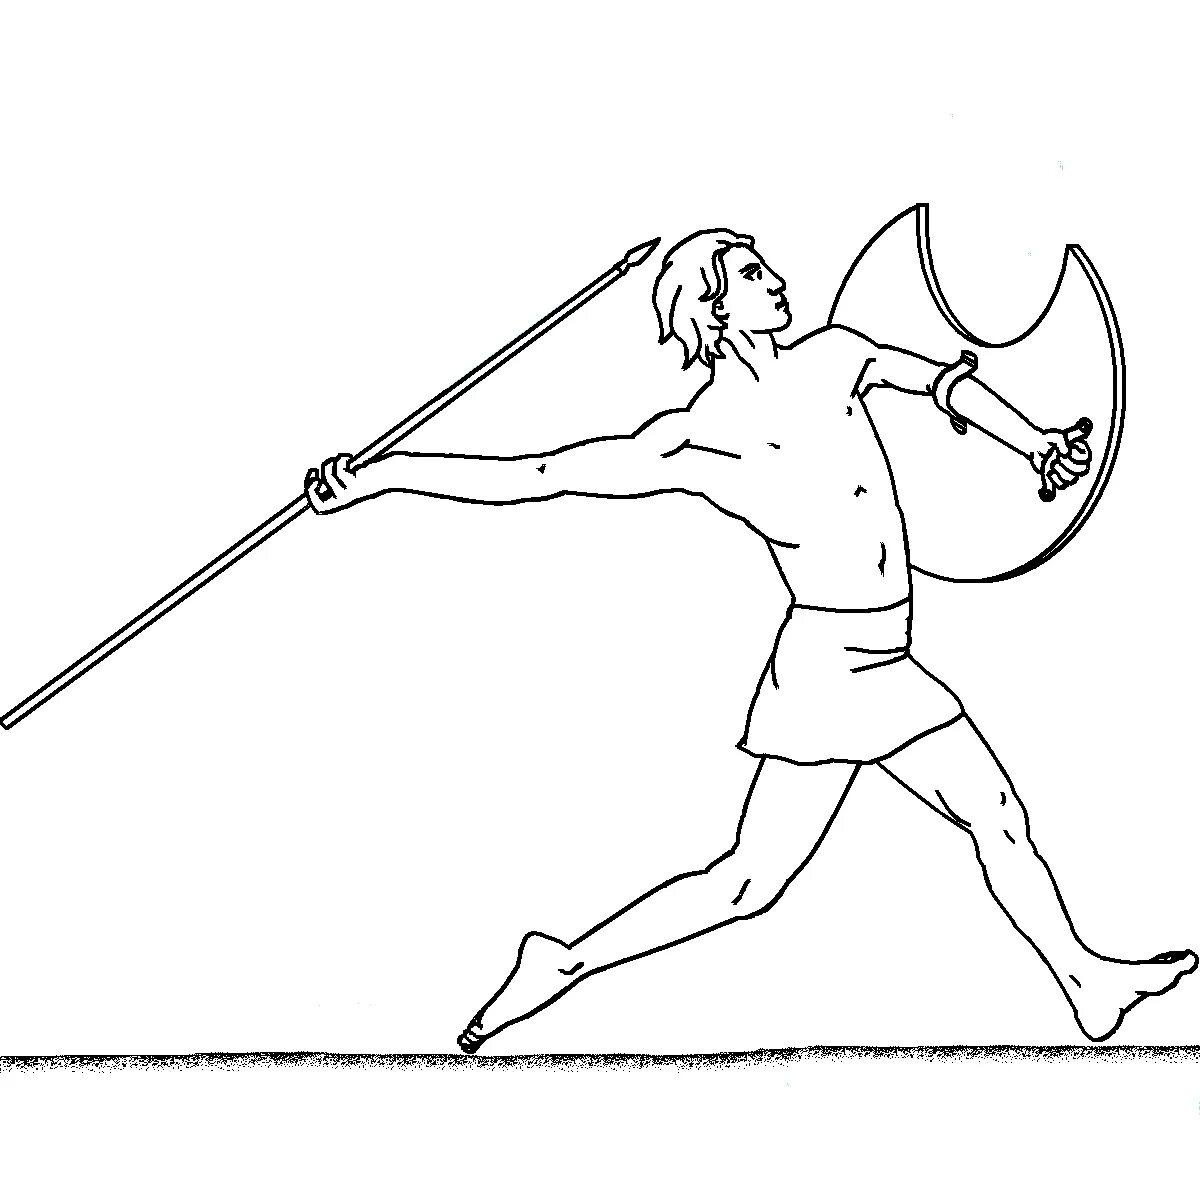 Ancient Olympic Games #1